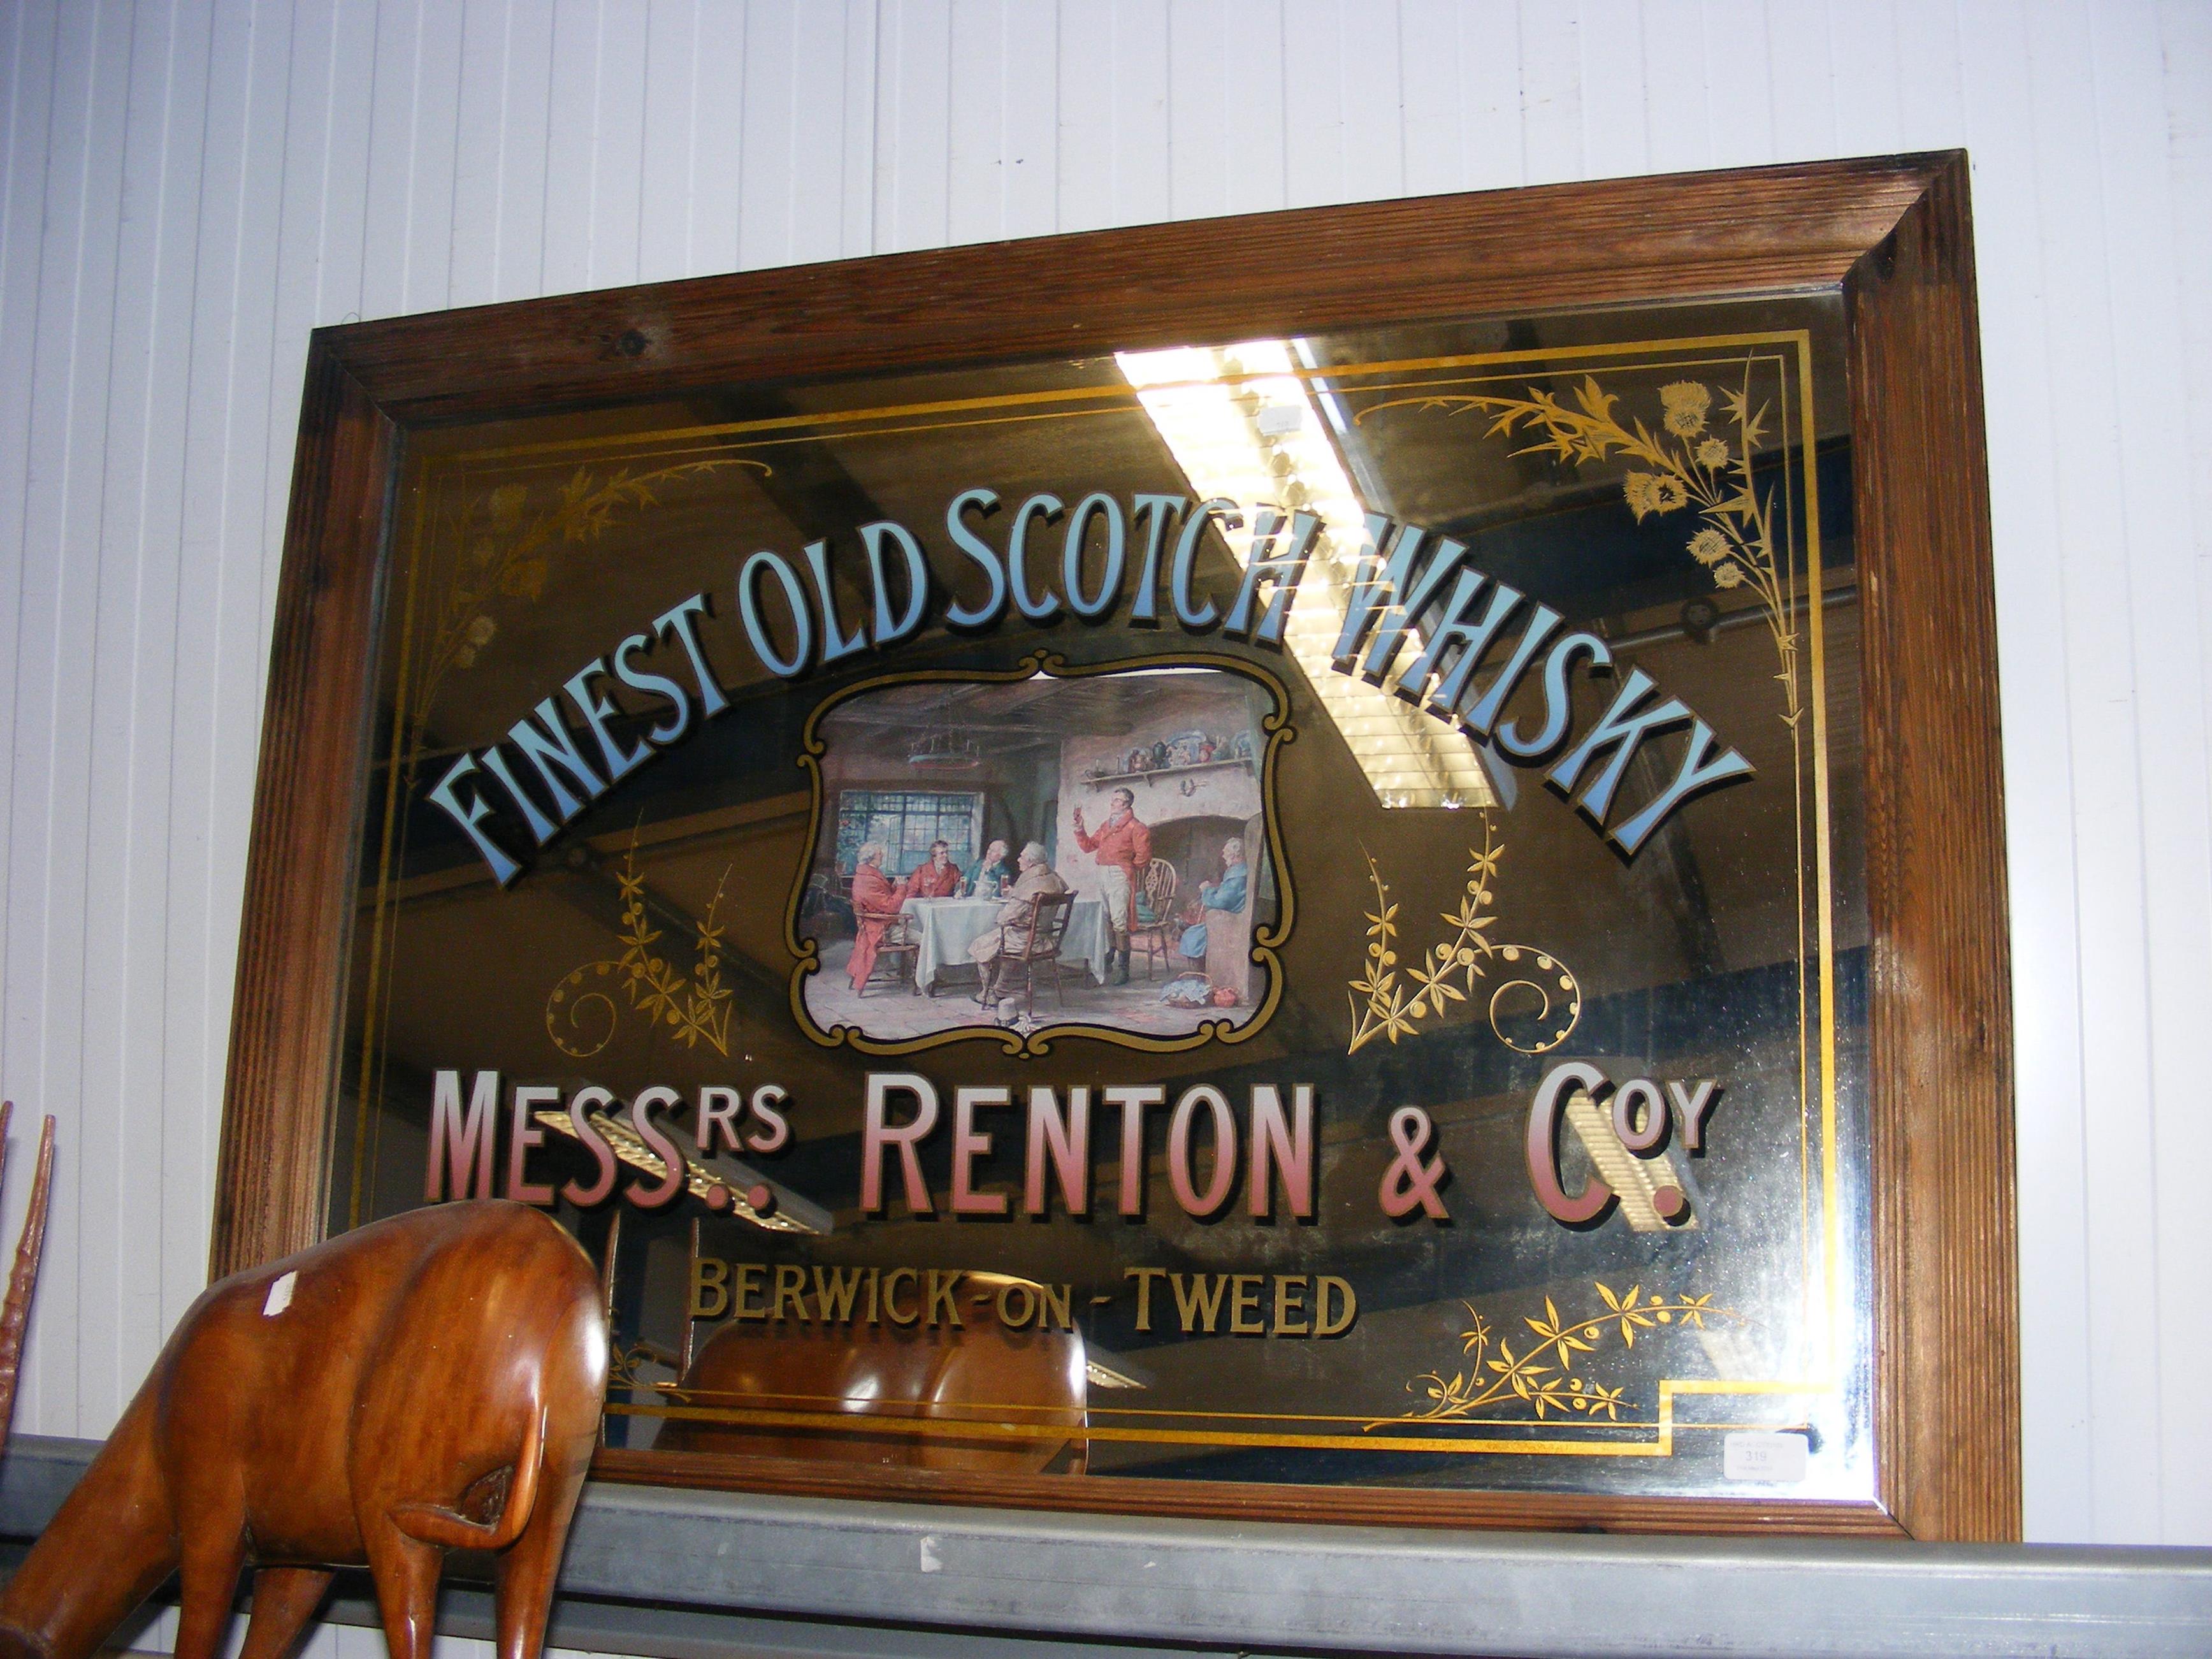 A whisky advertising mirror for Messrs. Renton & C